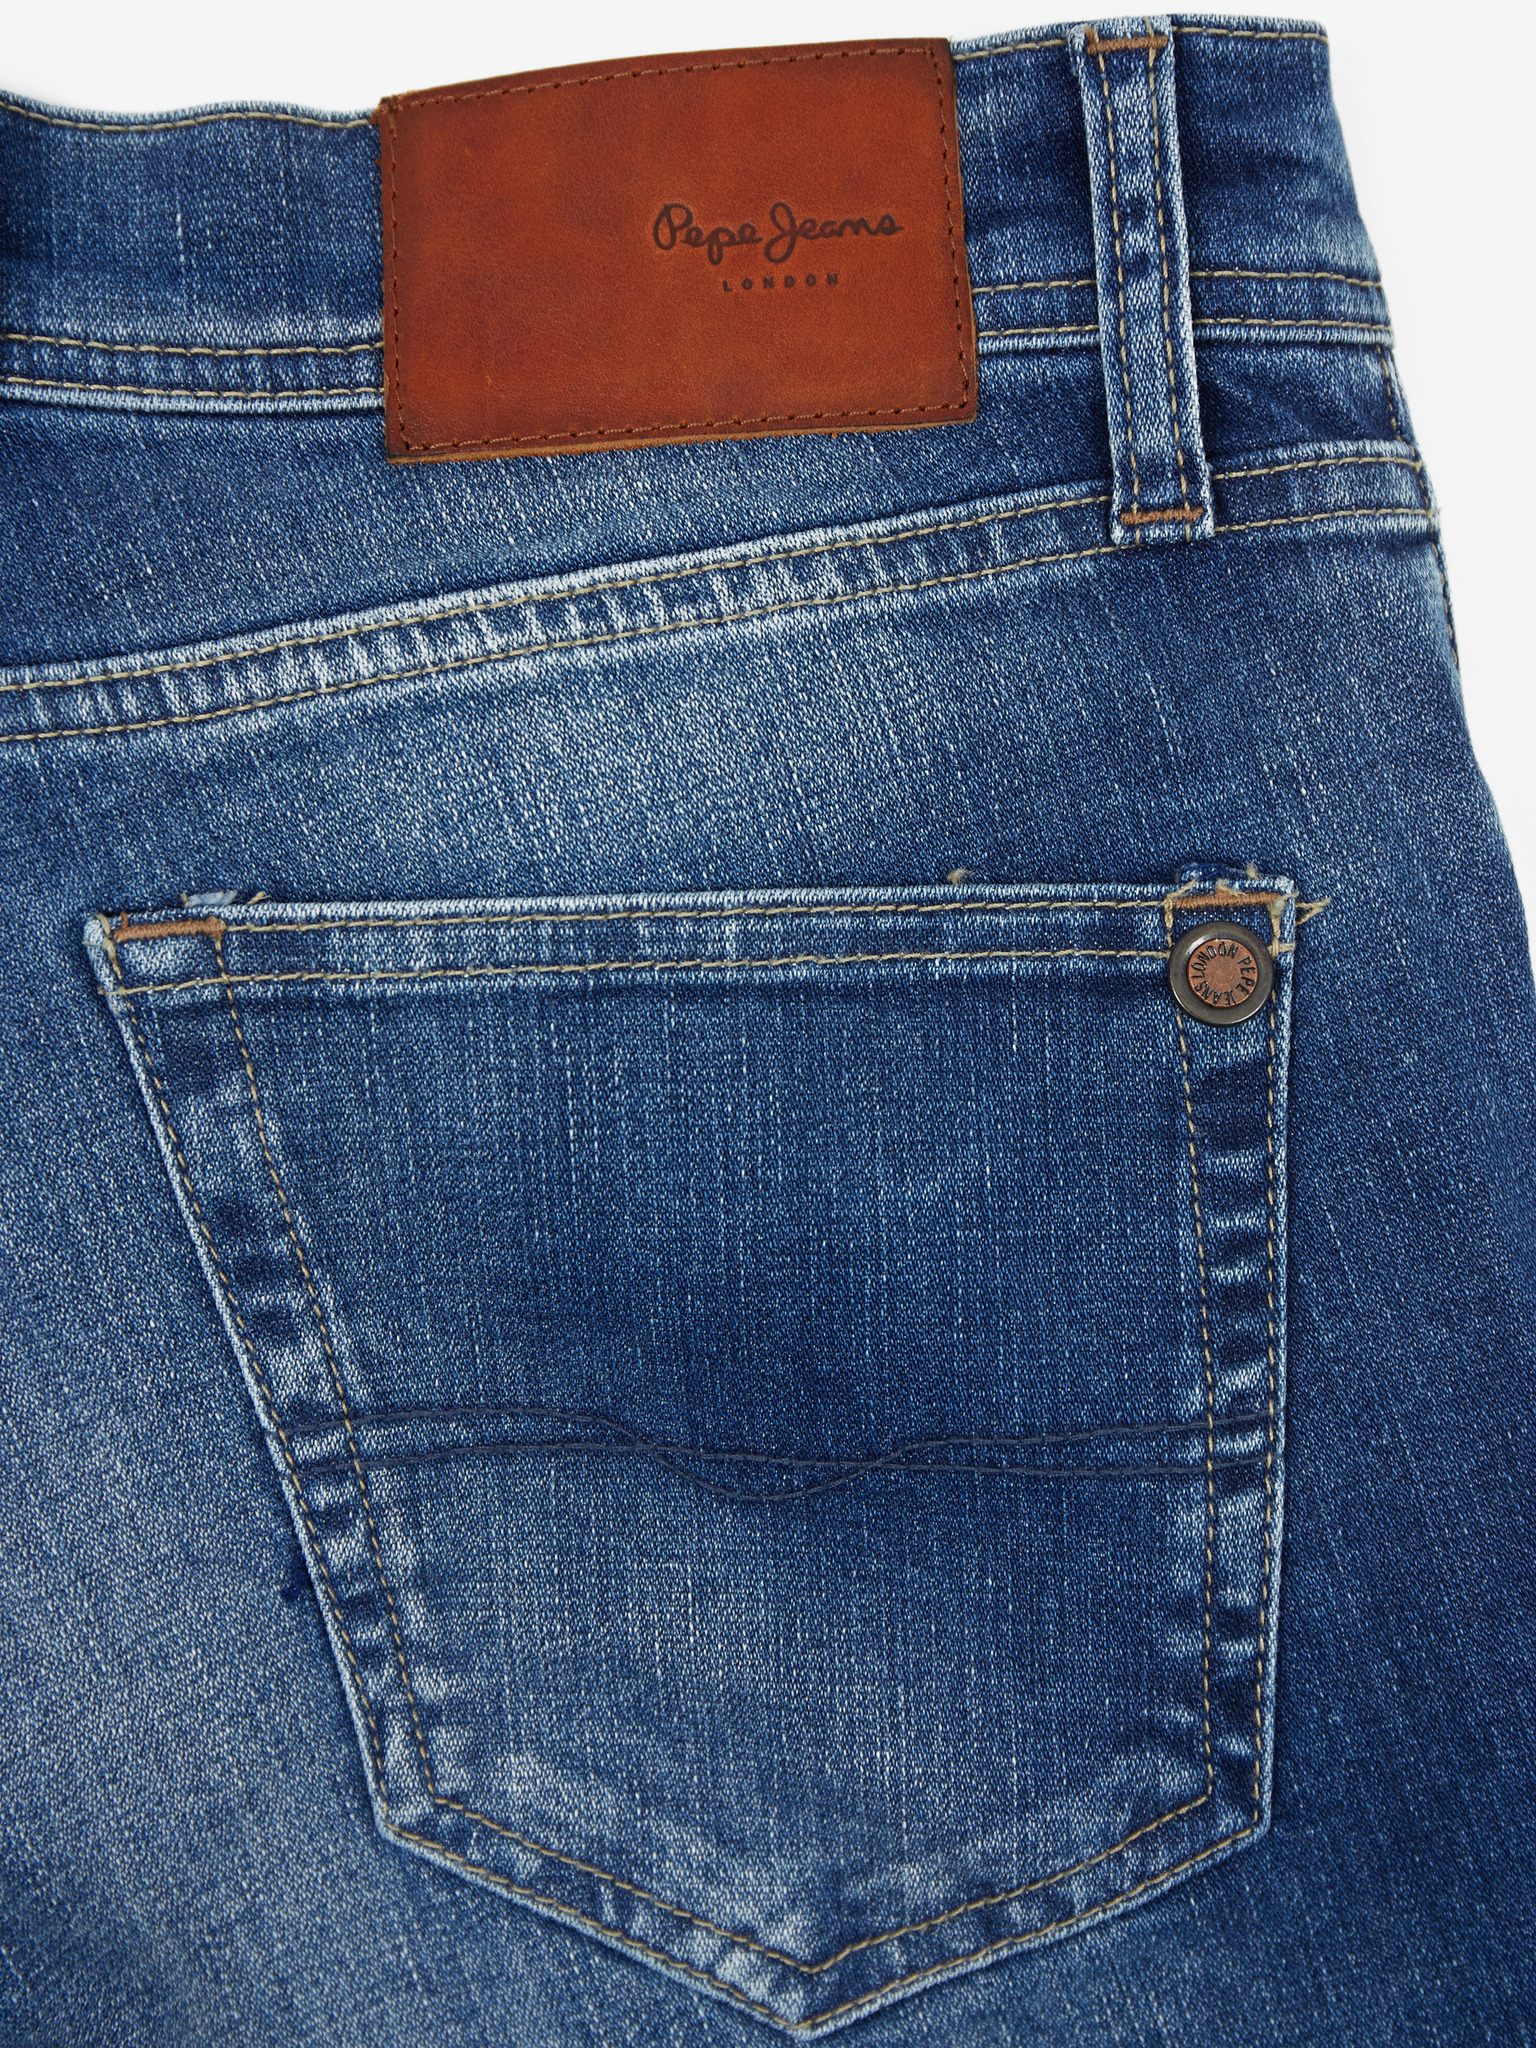 Pepe Jeans - Cane Jeans